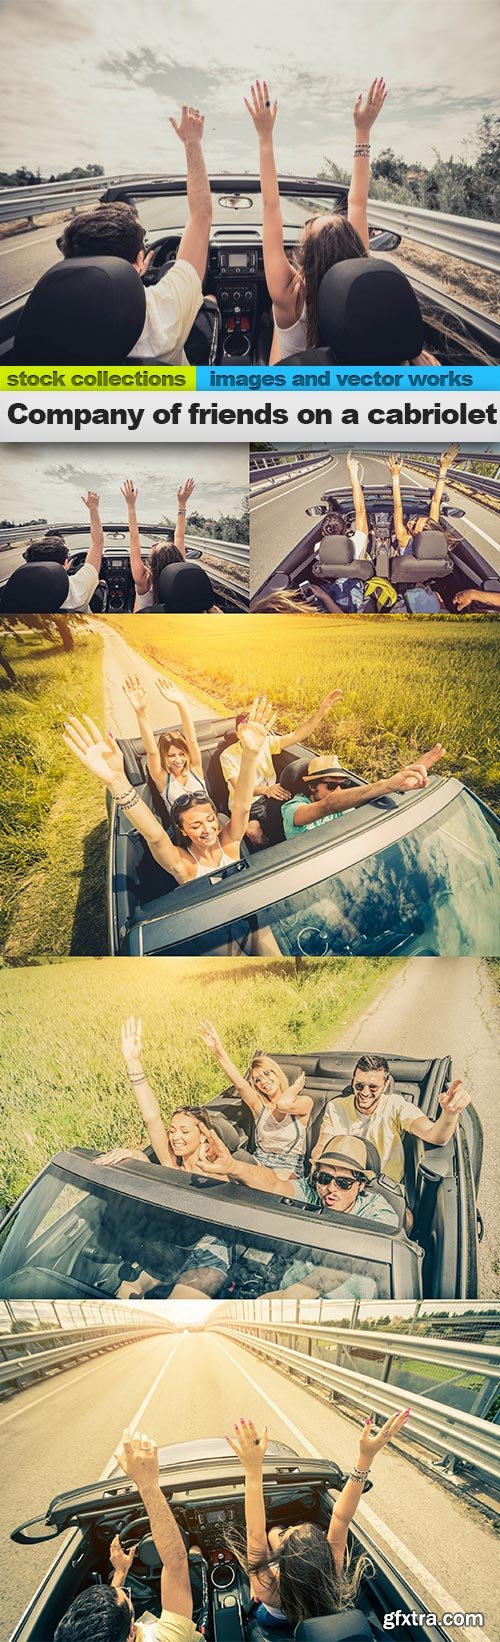 Company of friends on a cabriolet, 15 x UHQ JPEG